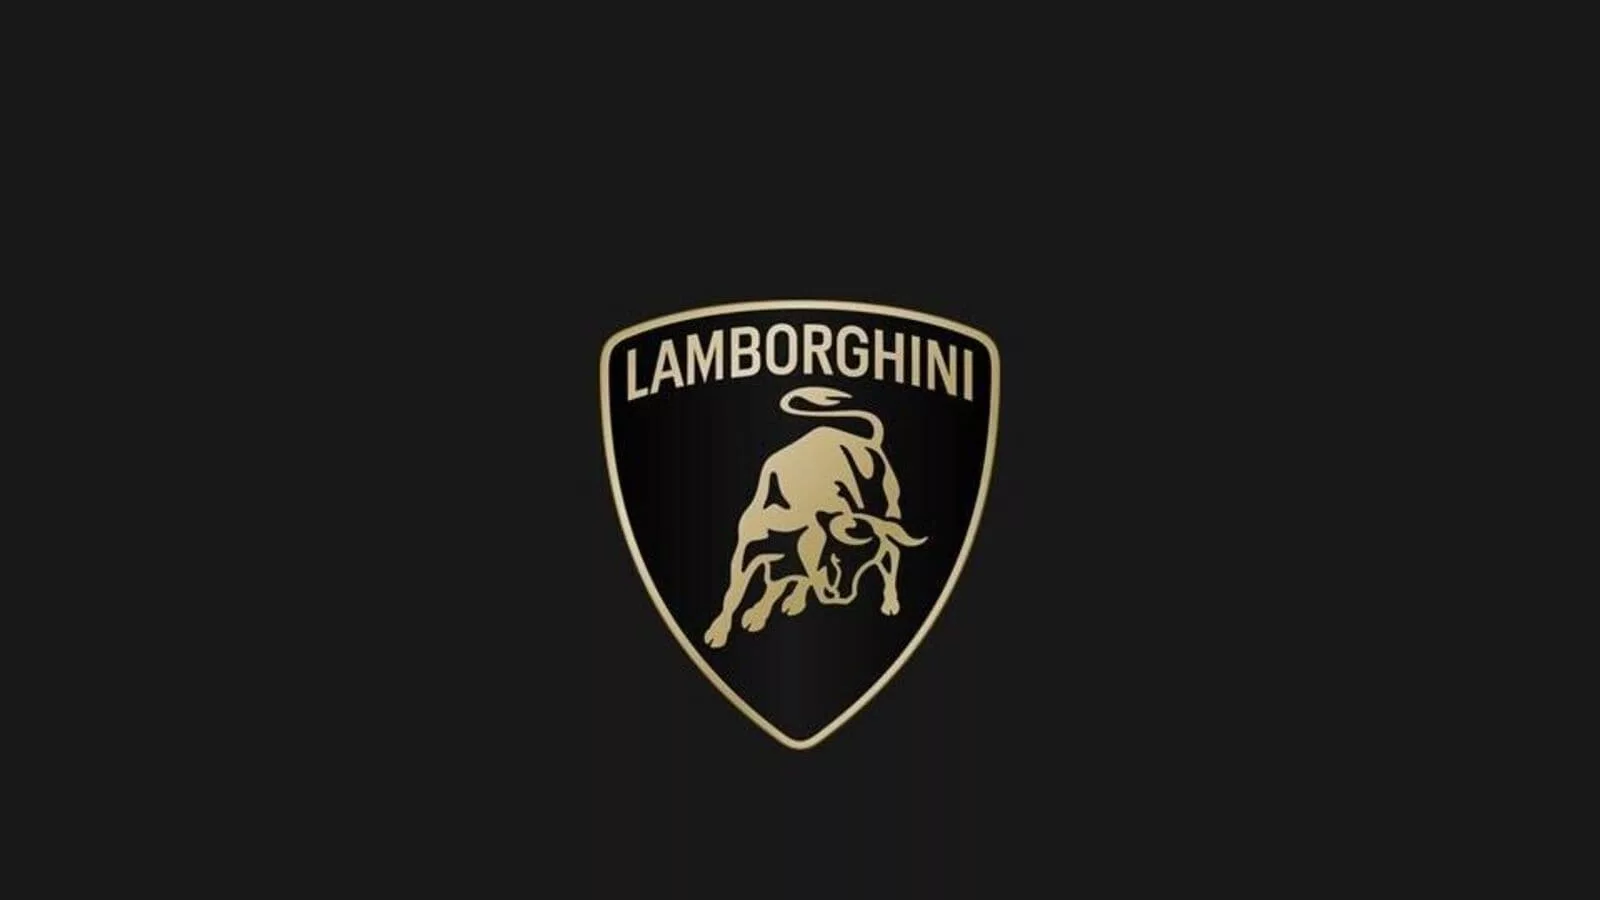 Lamborghini reveals its new logo. Can you spot the difference?